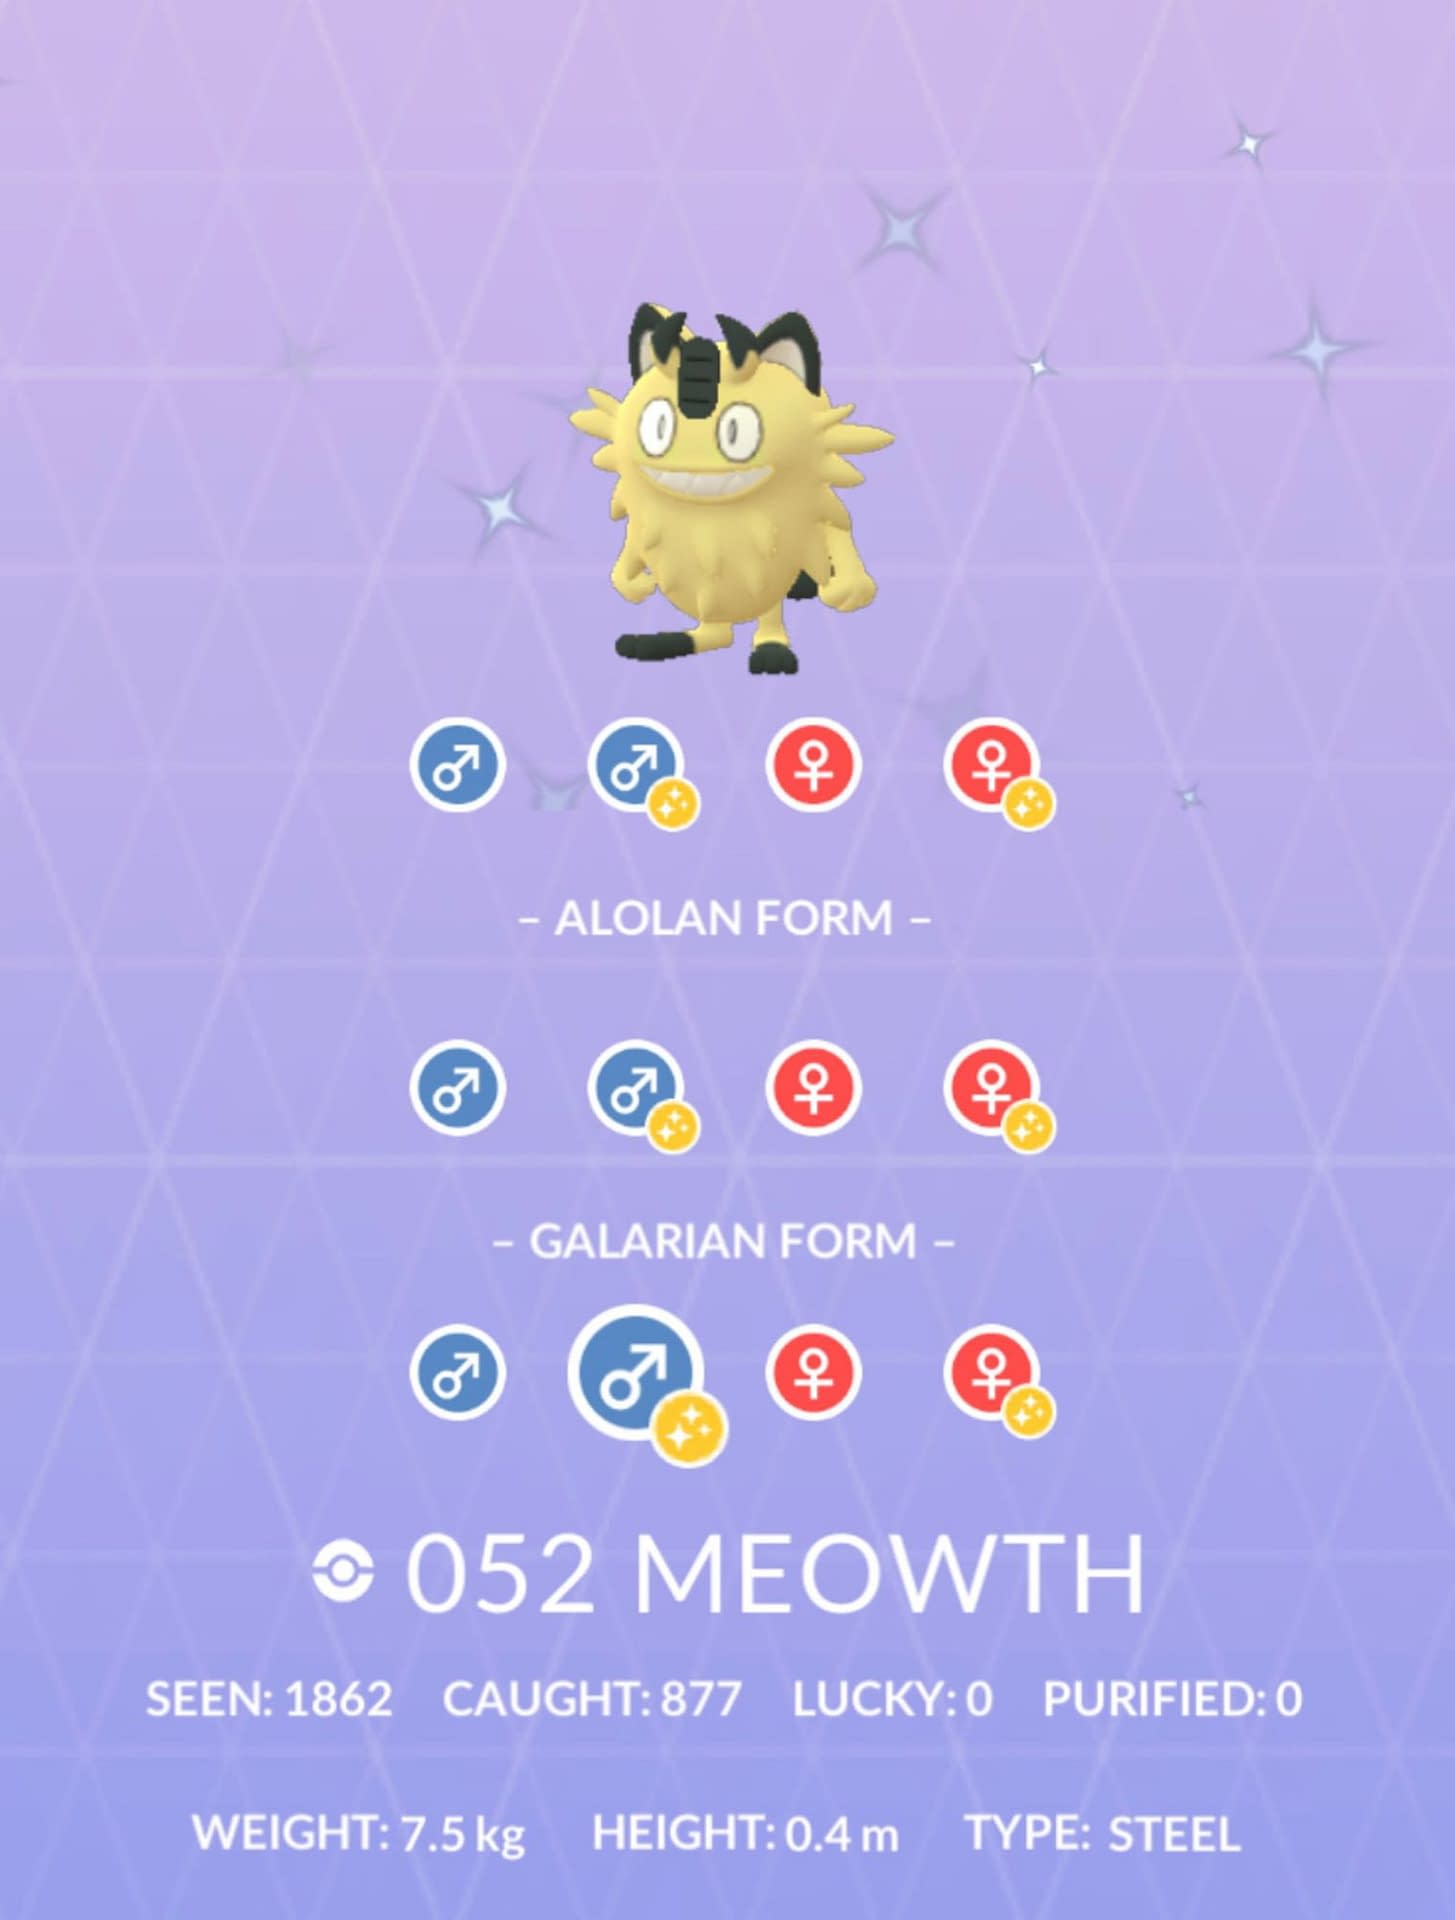 How To See Unreleased Shinies In Your Pokedex In Pokemon Go